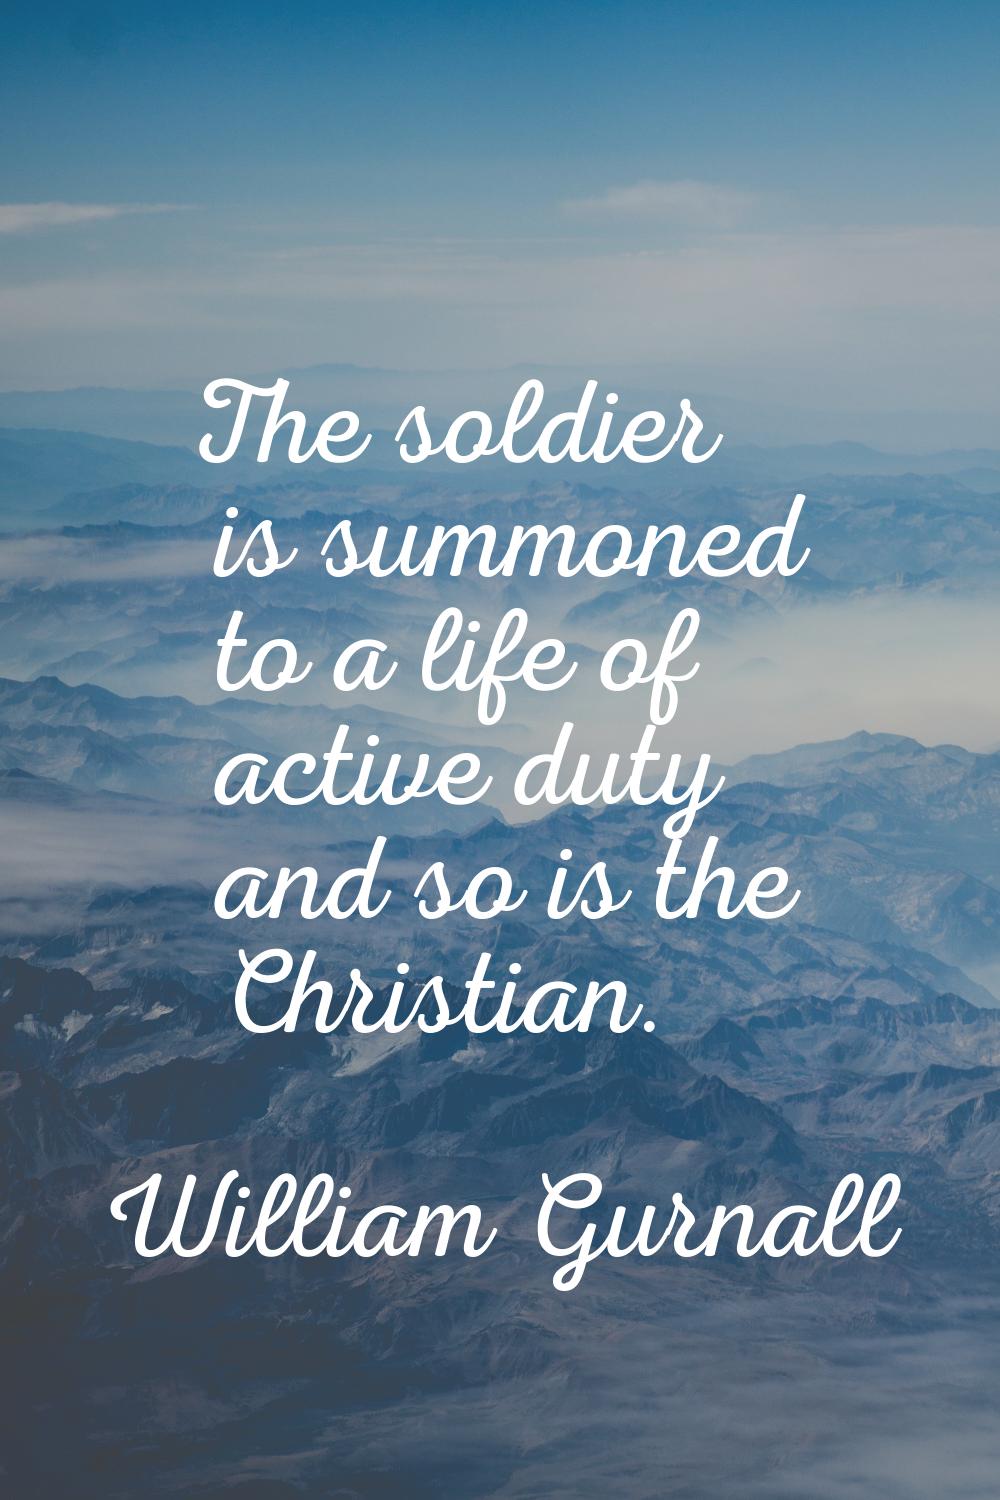 The soldier is summoned to a life of active duty and so is the Christian.